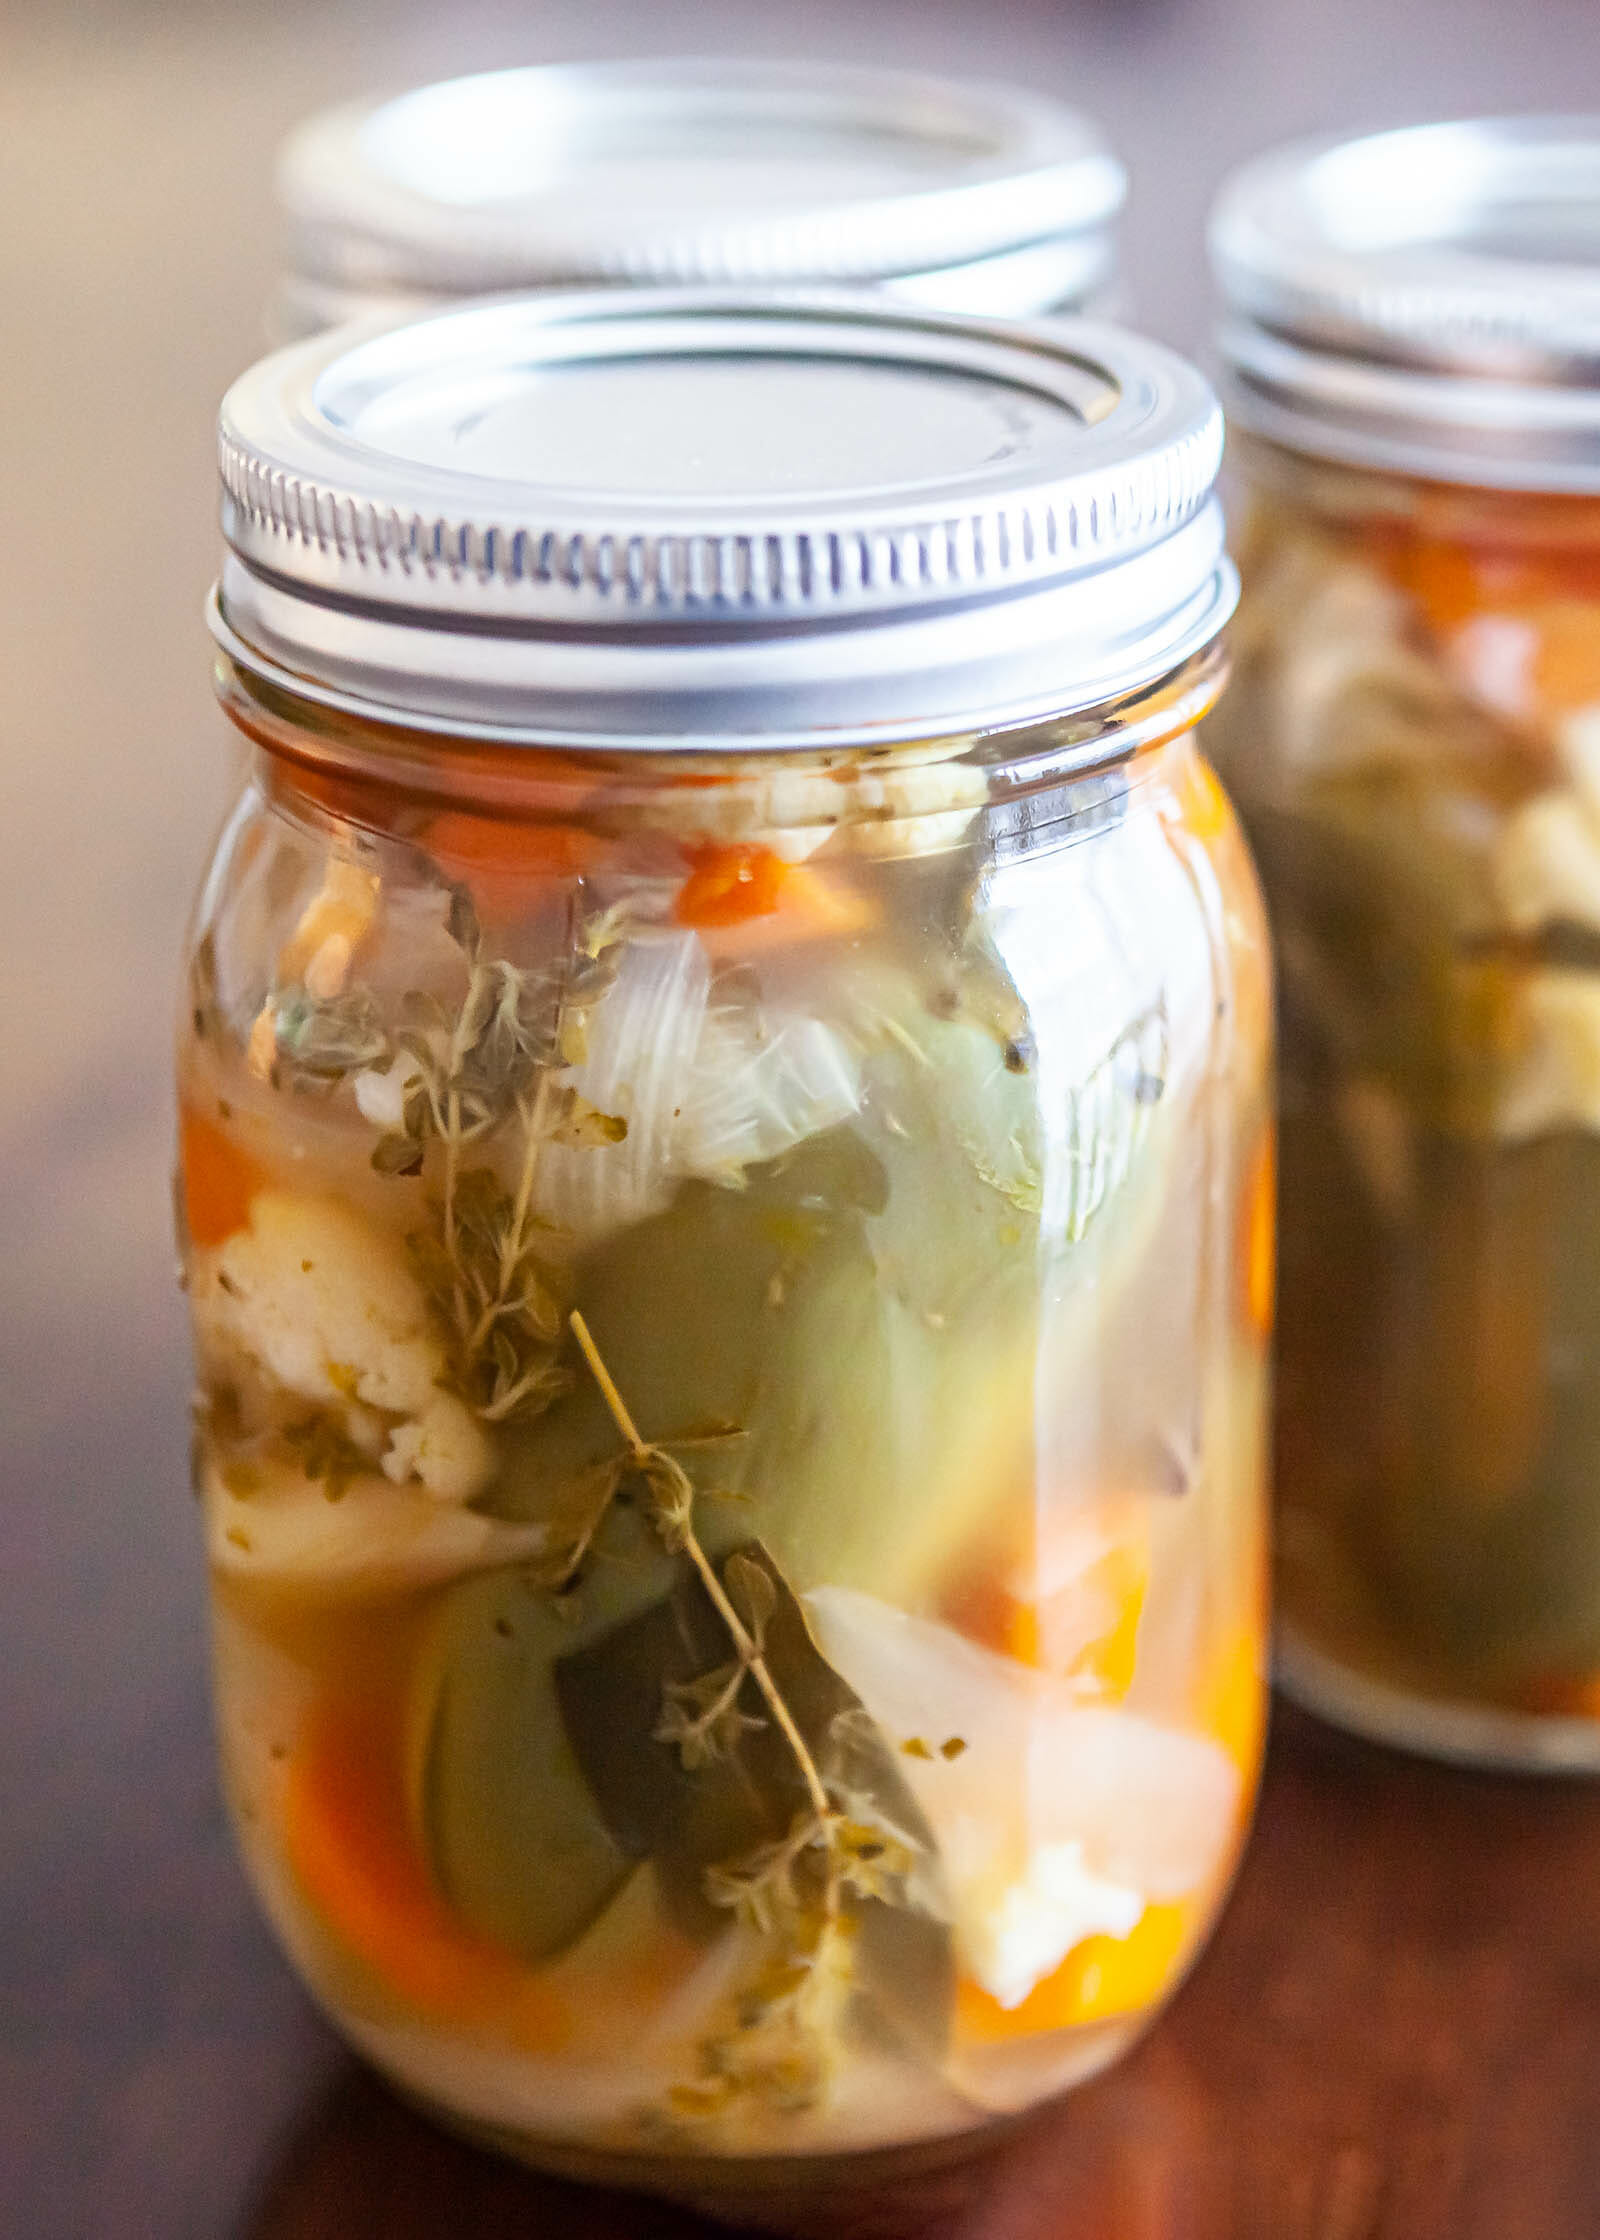 Pickled jalapenos (escabeche) with carrots and cauliflower in a pint jar